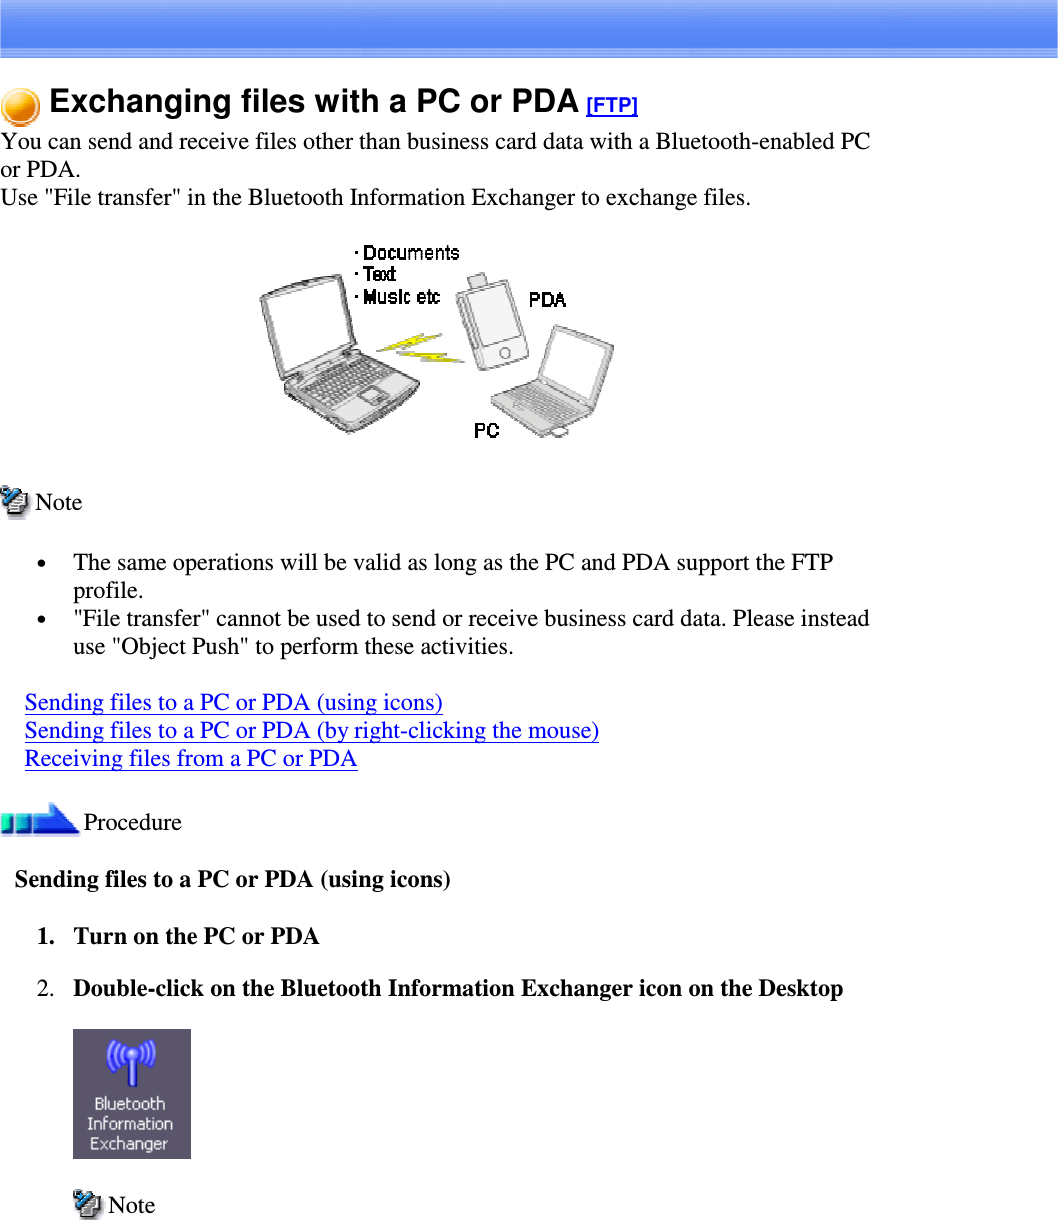 Exchanging files with a PC or PDA [FTP]You can send and receive files other than business card data with a Bluetooth-enabled PCor PDA.Use &quot;File transfer&quot; in the Bluetooth Information Exchanger to exchange files.Note•  The same operations will be valid as long as the PC and PDA support the FTPprofile.•  &quot;File transfer&quot; cannot be used to send or receive business card data. Please insteaduse &quot;Object Push&quot; to perform these activities.Sending files to a PC or PDA (using icons)Sending files to a PC or PDA (by right-clicking the mouse)Receiving files from a PC or PDAProcedureSending files to a PC or PDA (using icons)1. Turn on the PC or PDA2. Double-click on the Bluetooth Information Exchanger icon on the DesktopNote